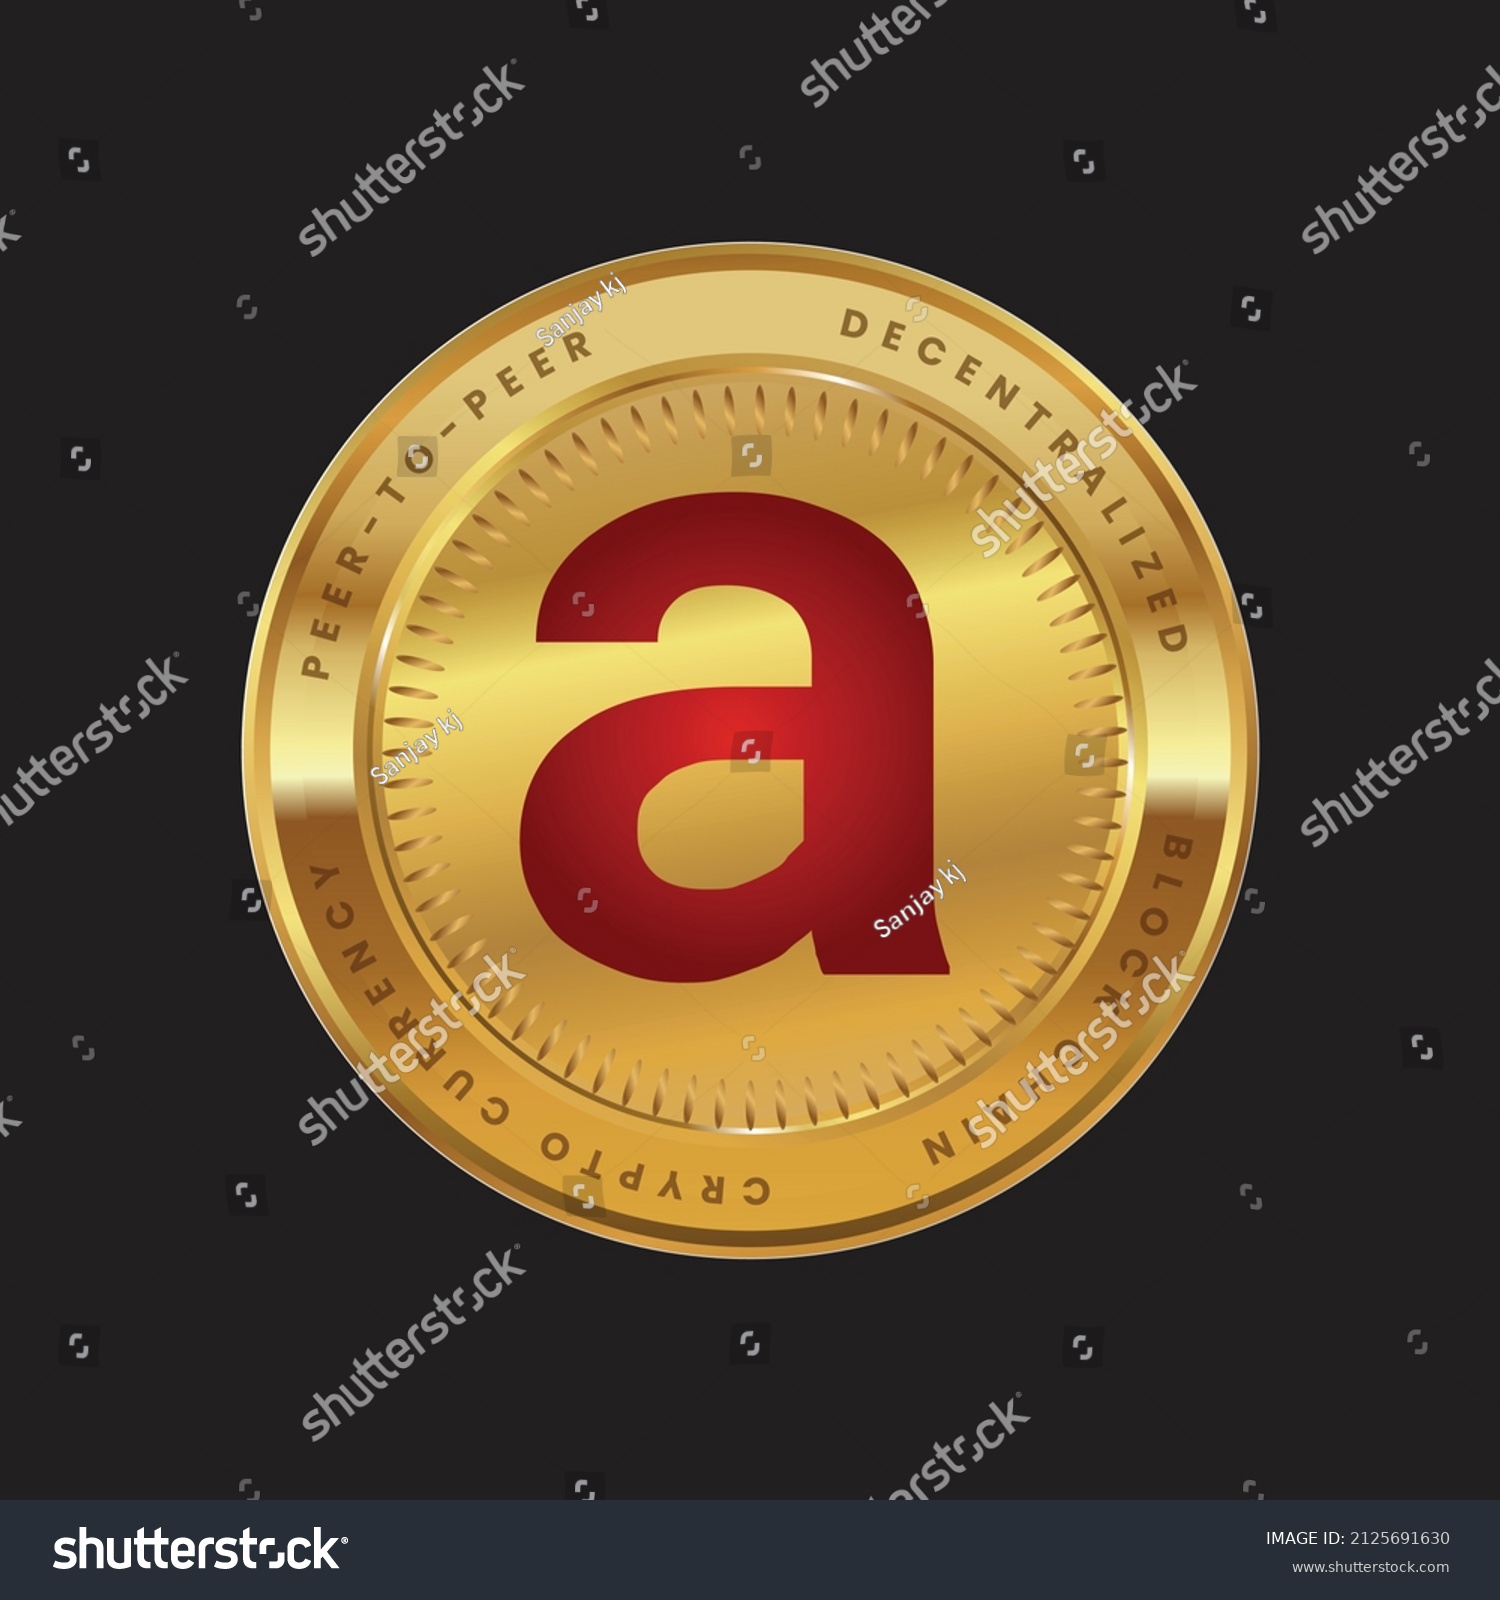 SVG of Arweave (AR) crypto currency token logo in red color concept on gold coin isolated in black background. Vector illustration design for modern transactions news, poster, banner, web, print. svg